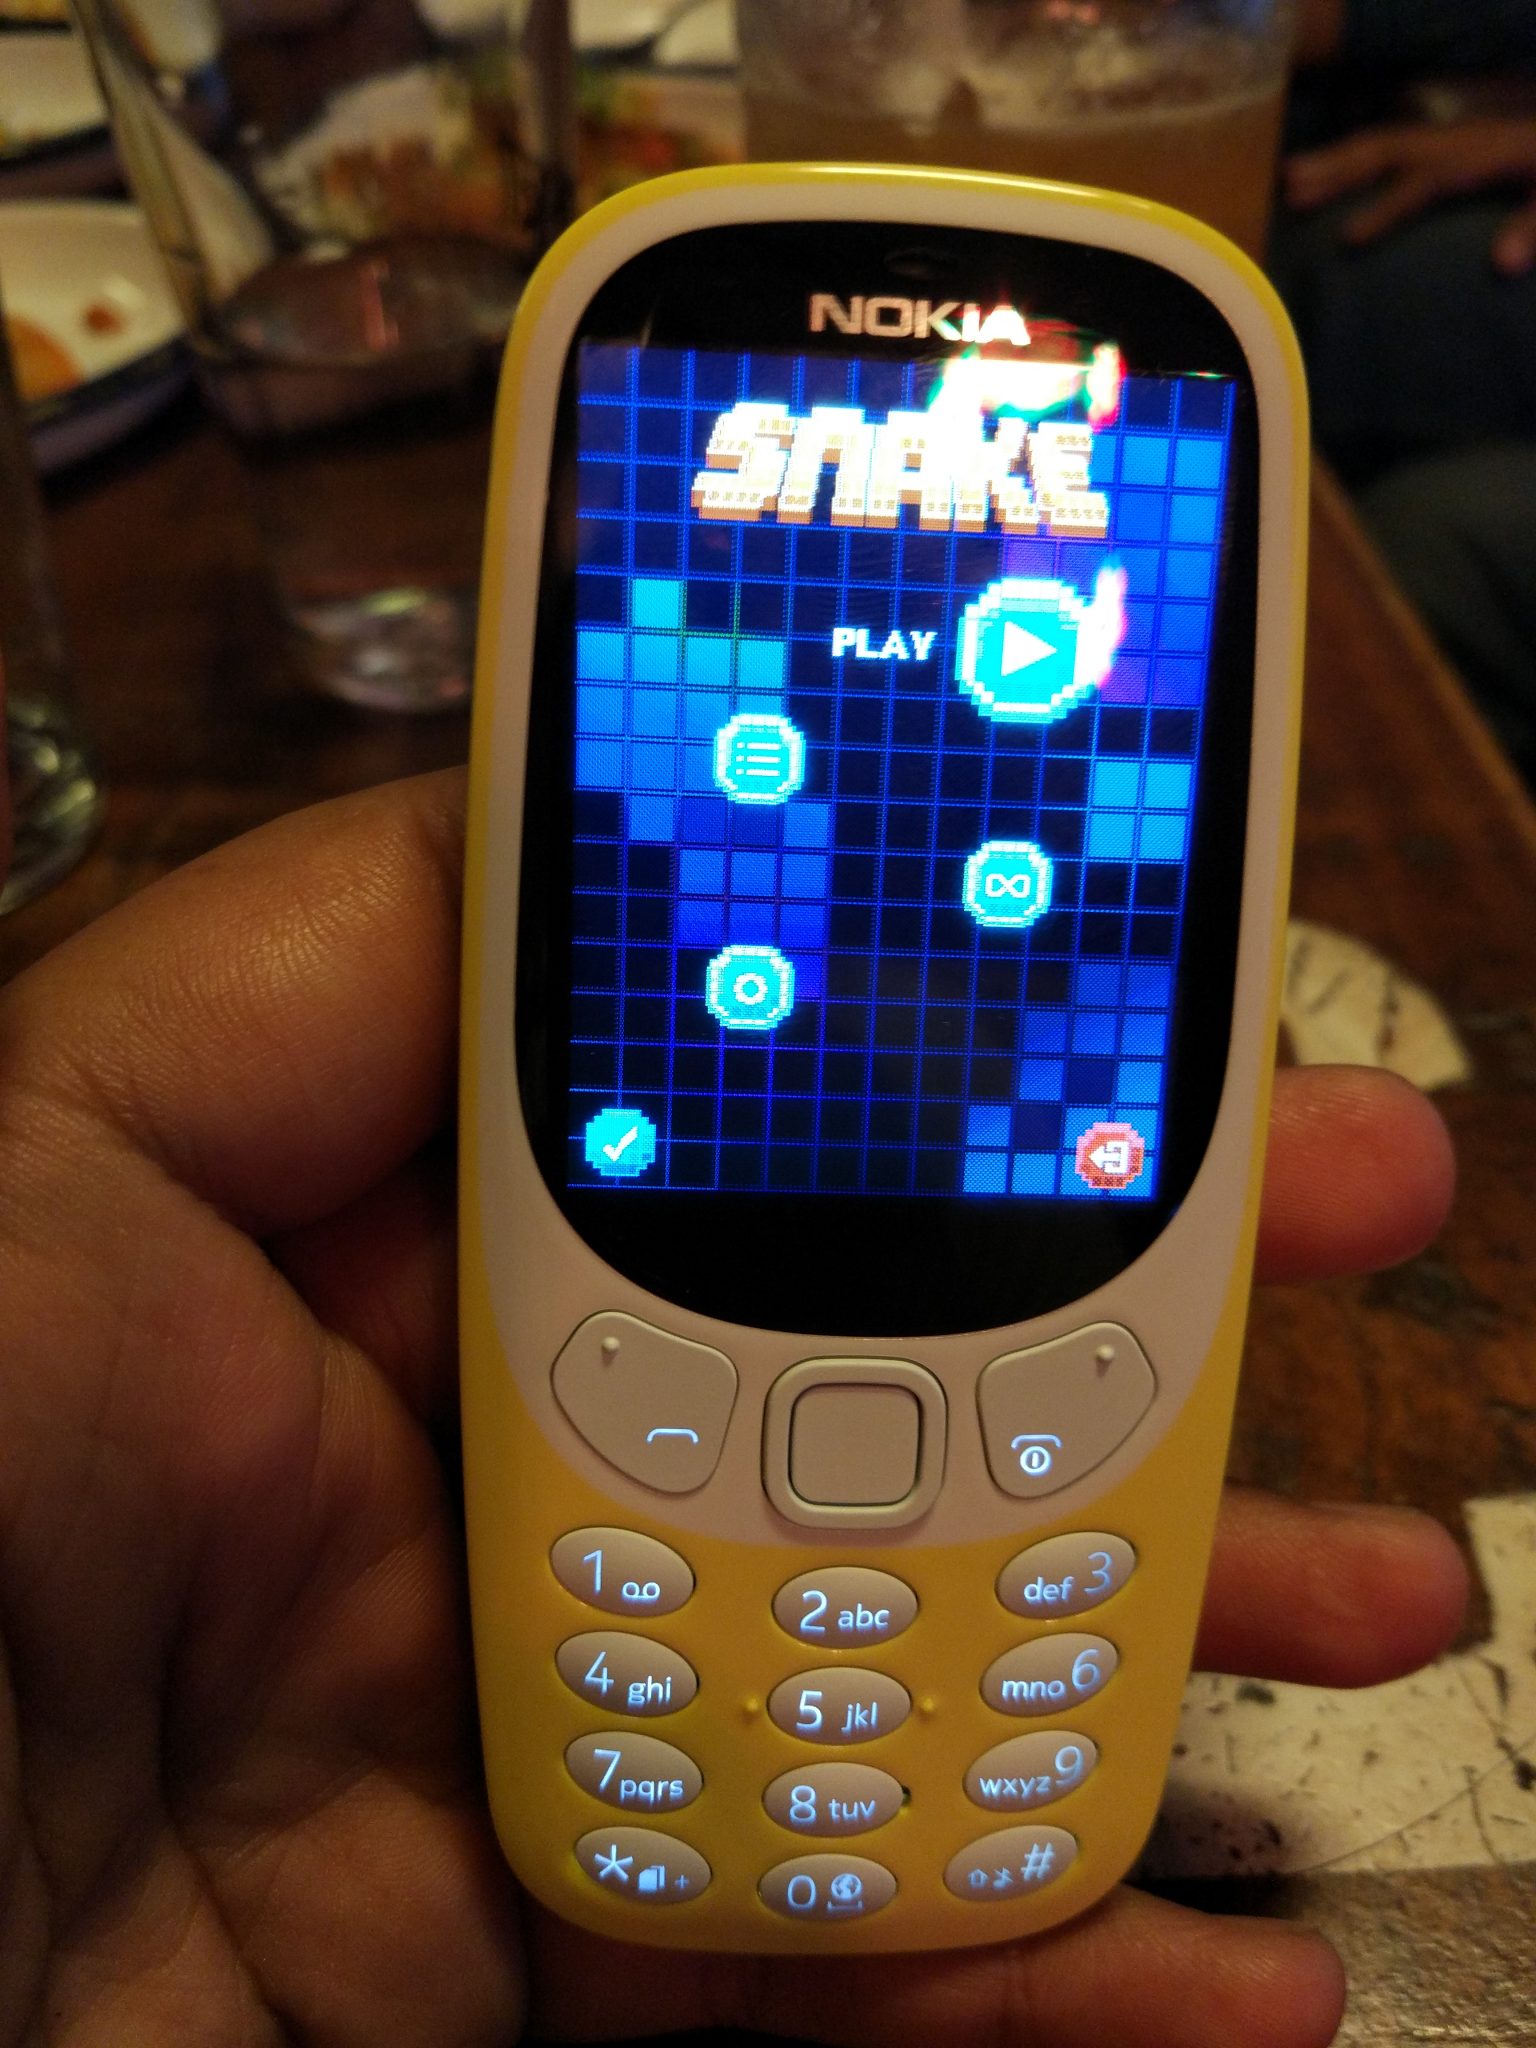 Nokia 3310 3G's Snake: Was it worth the update? – GameAxis